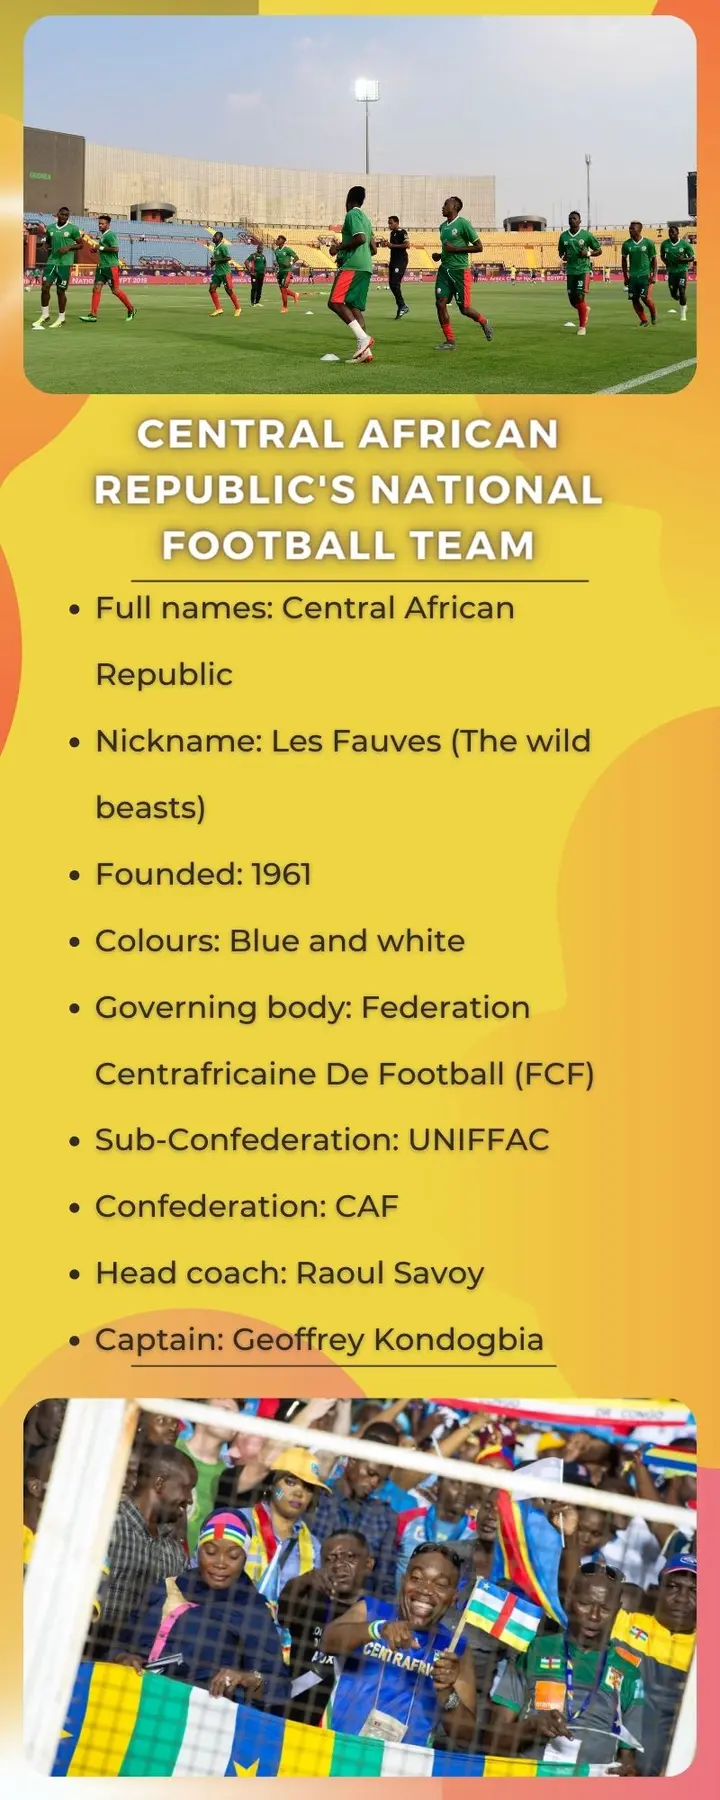 Central African Republic's national football team